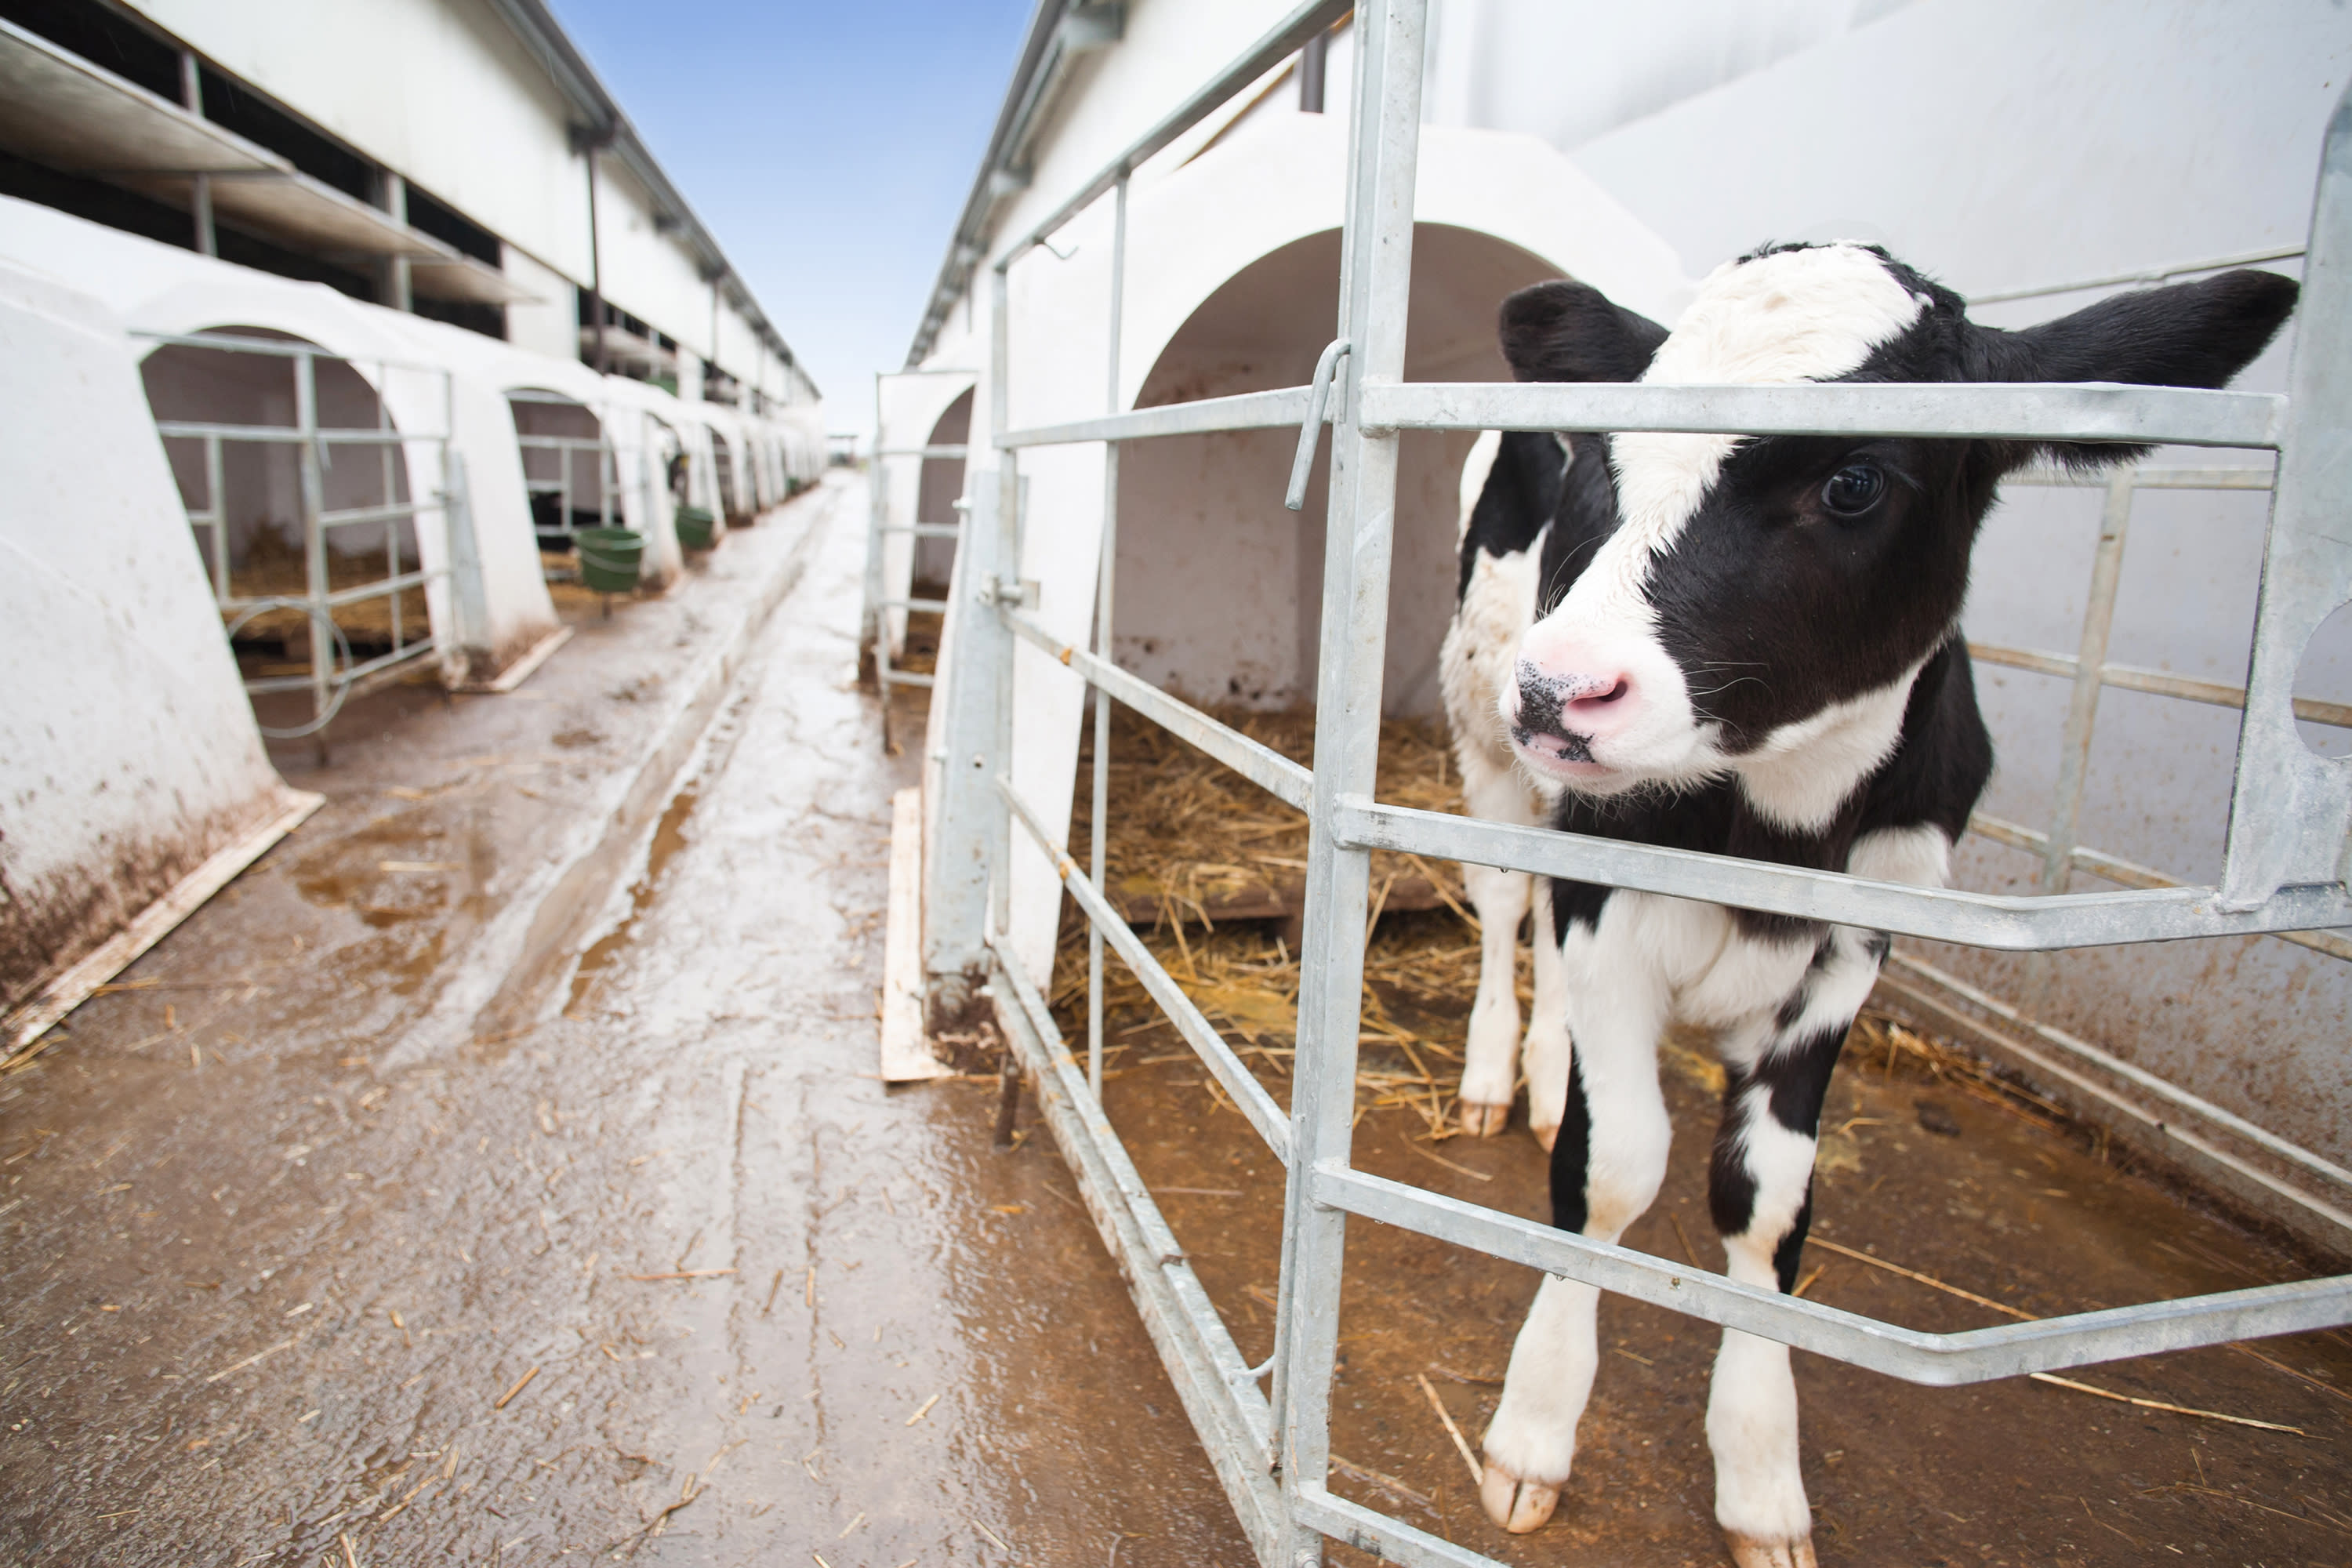 Veal: What Animal Does it Come From and Why is it Cruel?